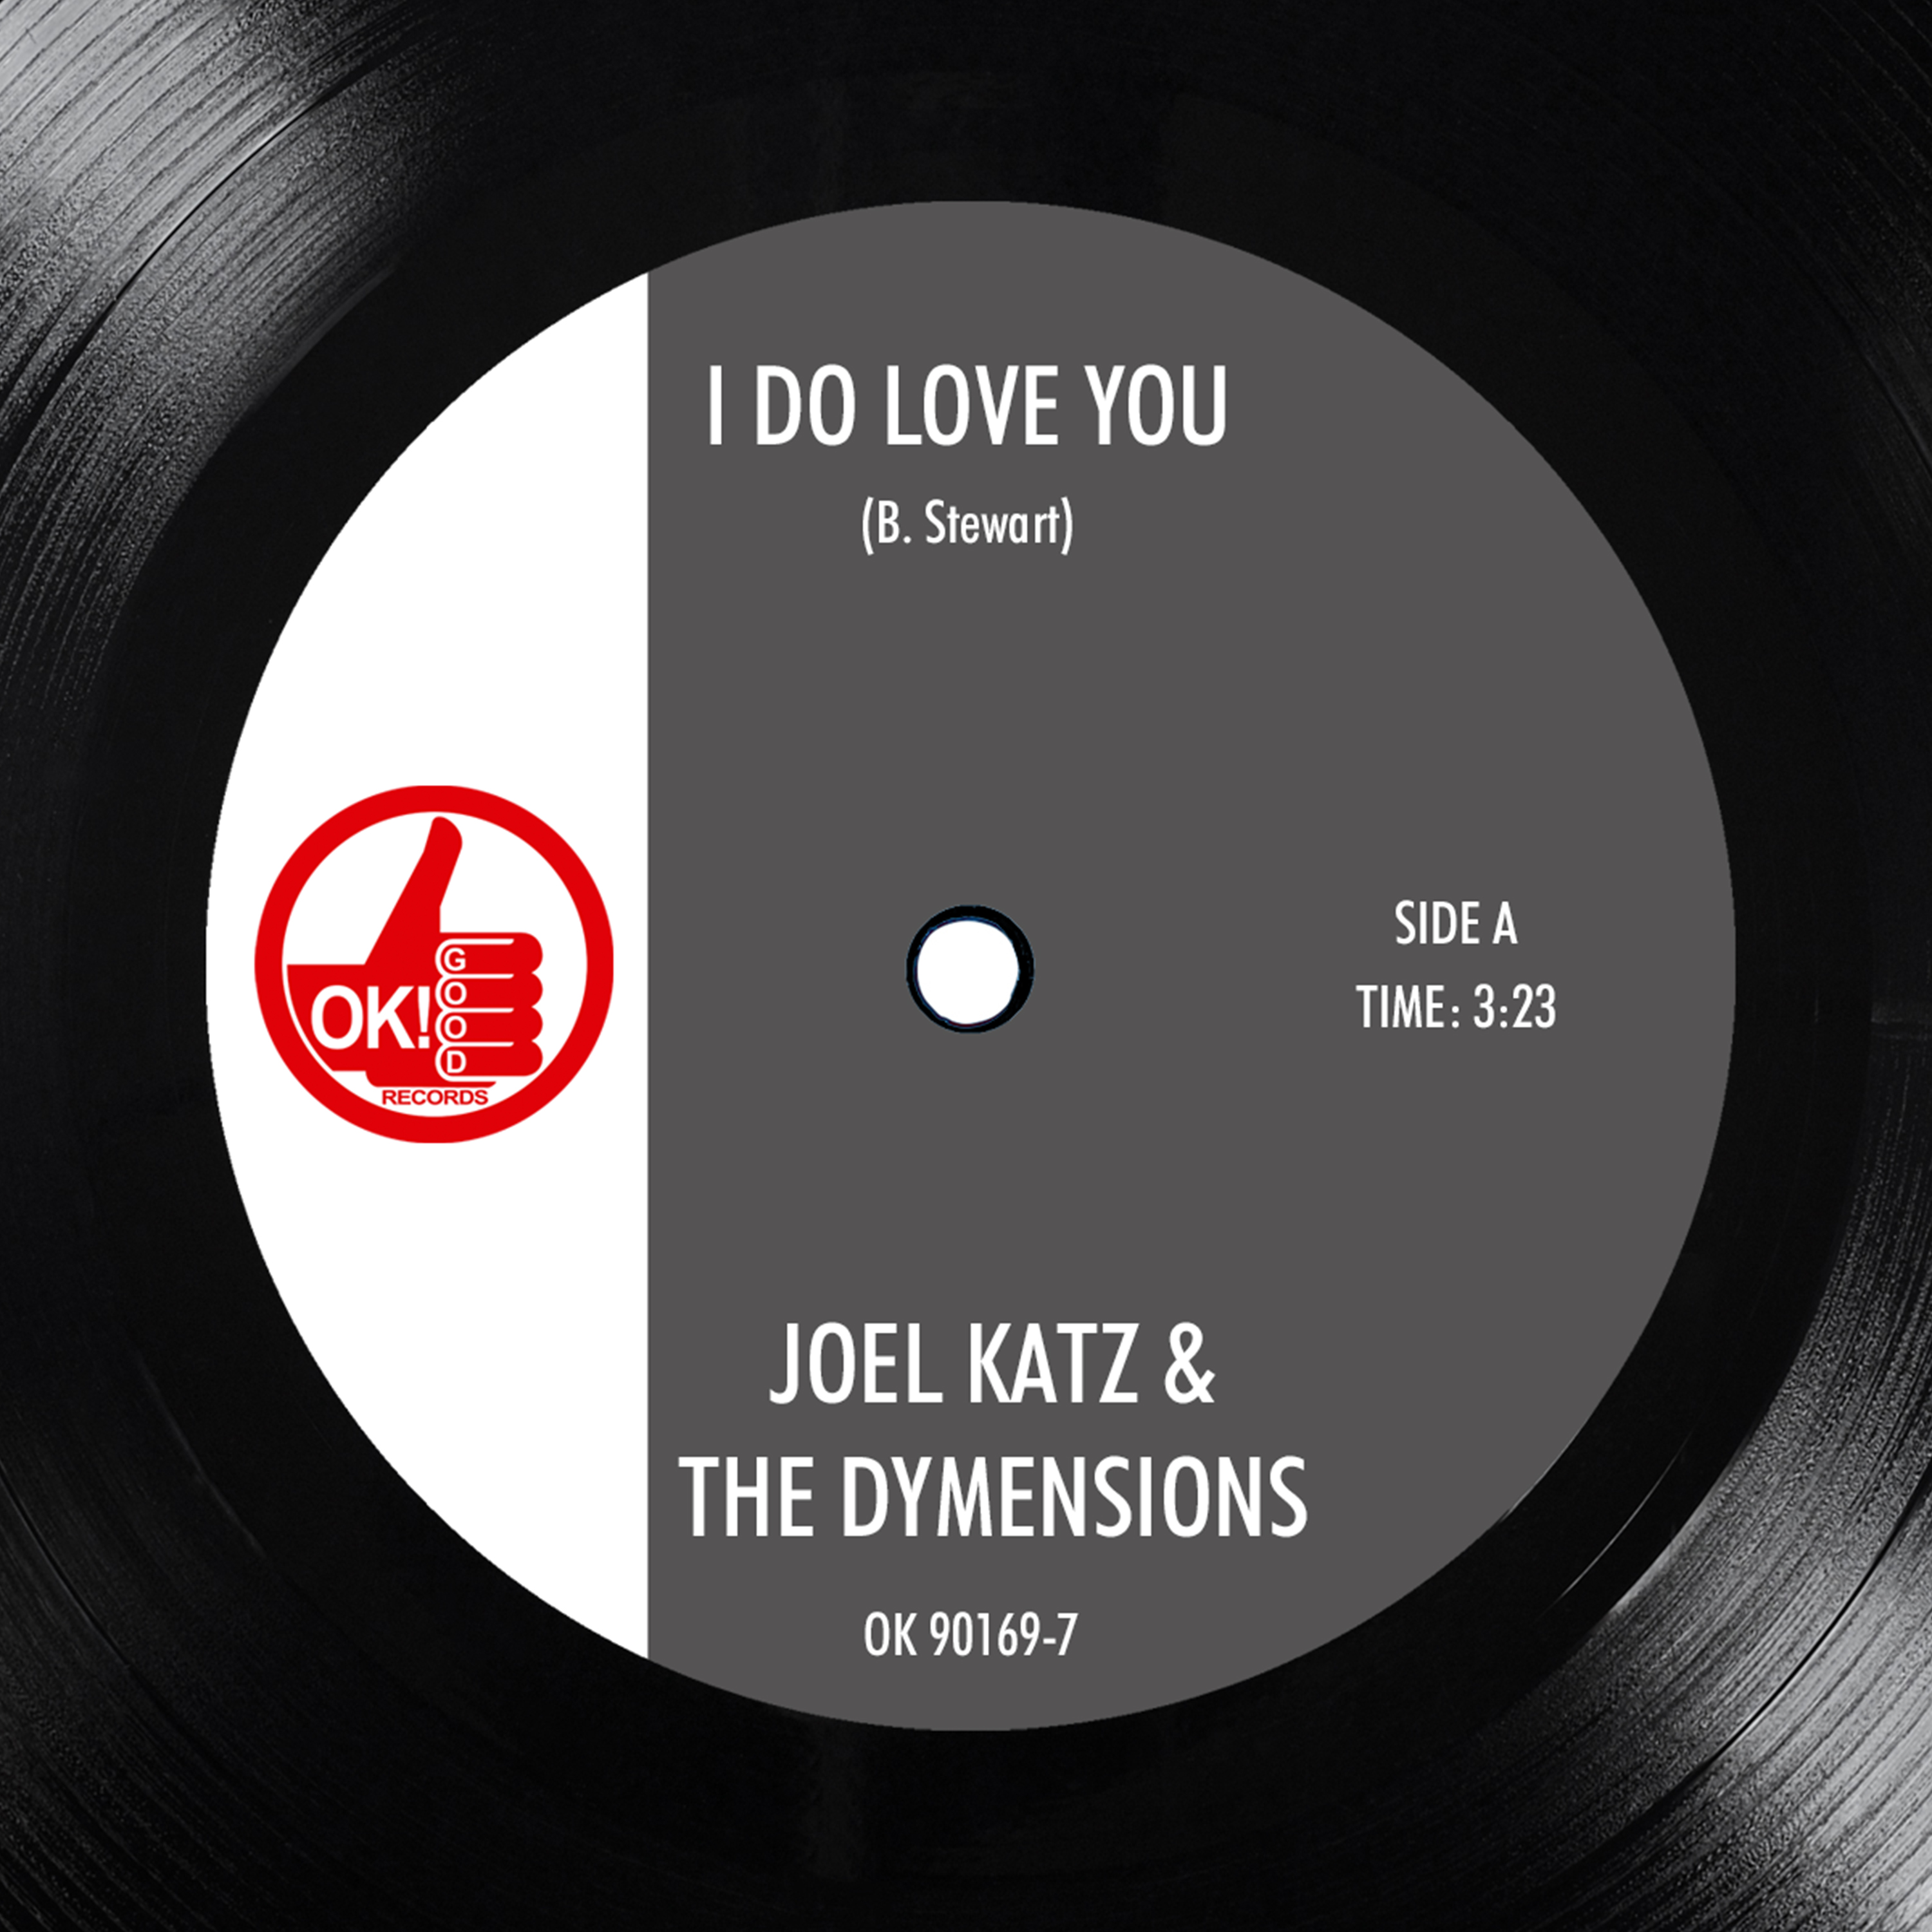 Joel Katz & The Dymensions Release Limited-Edition 7″ Vinyl Single 'I Do Love You / Ooh Child'